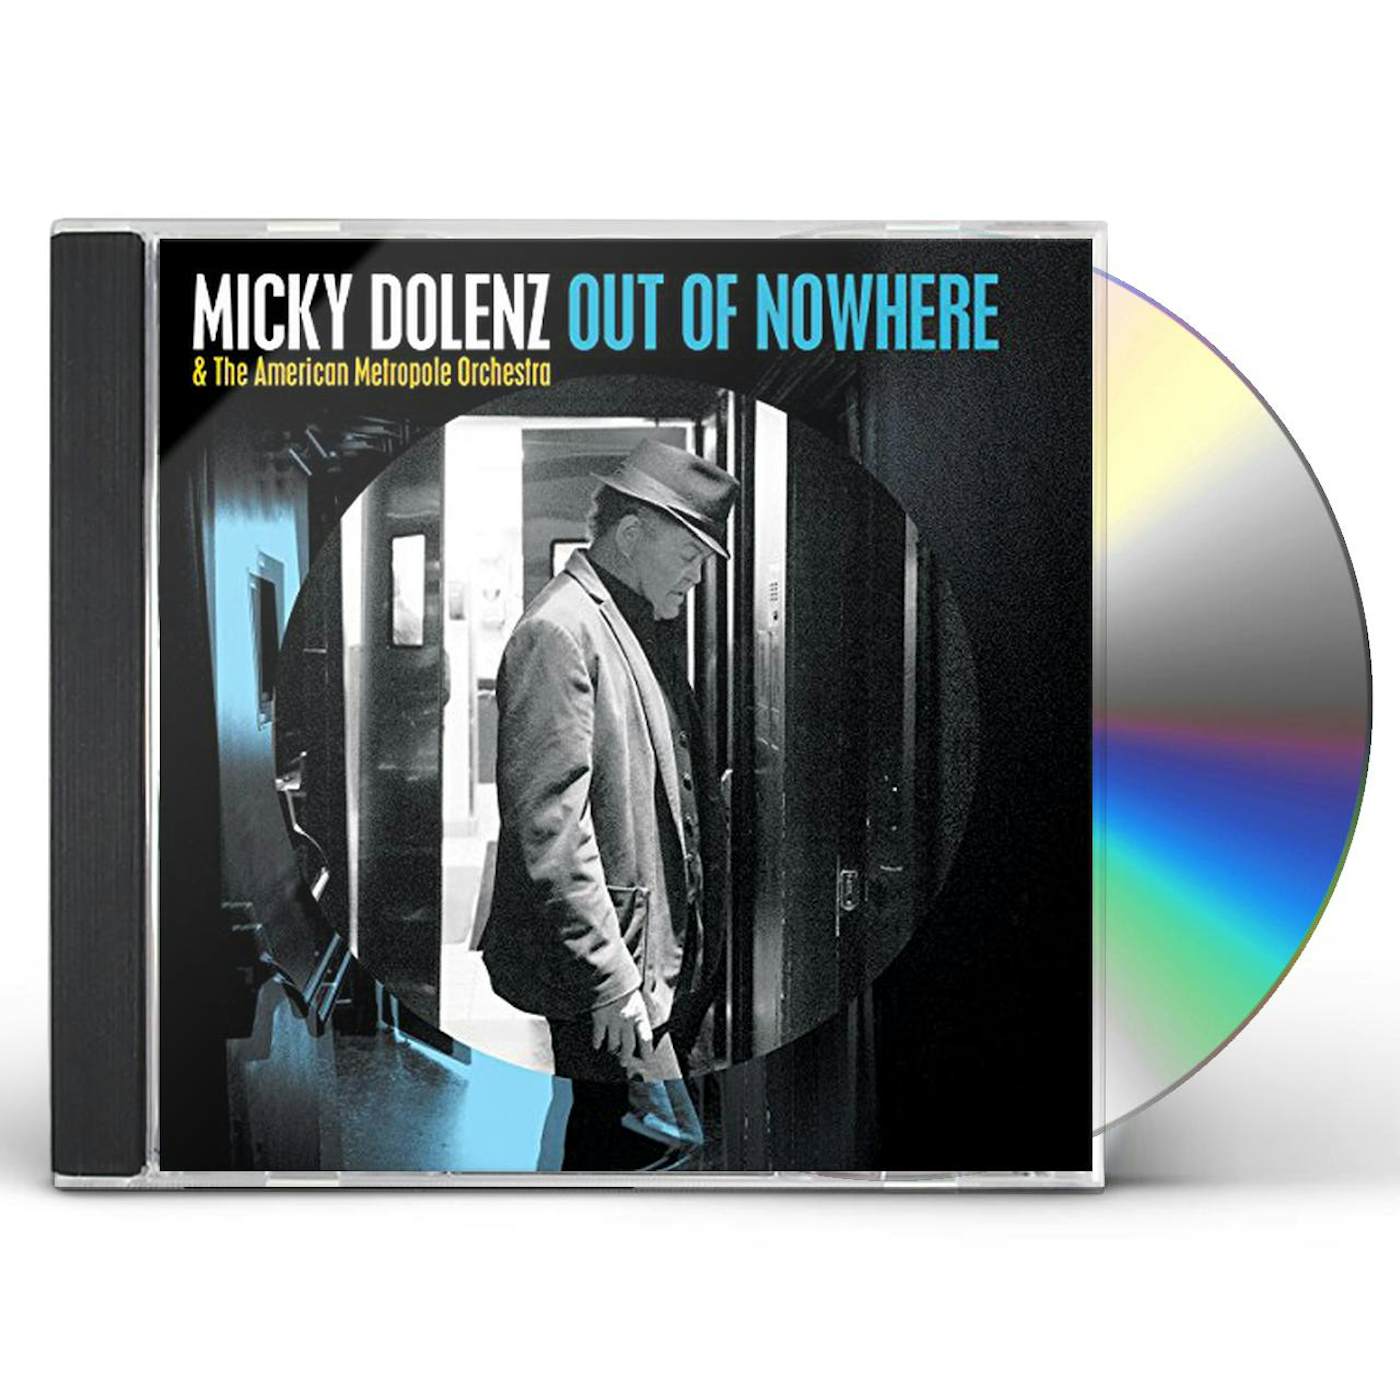 Micky Dolenz OUT OF NOWHERE CD